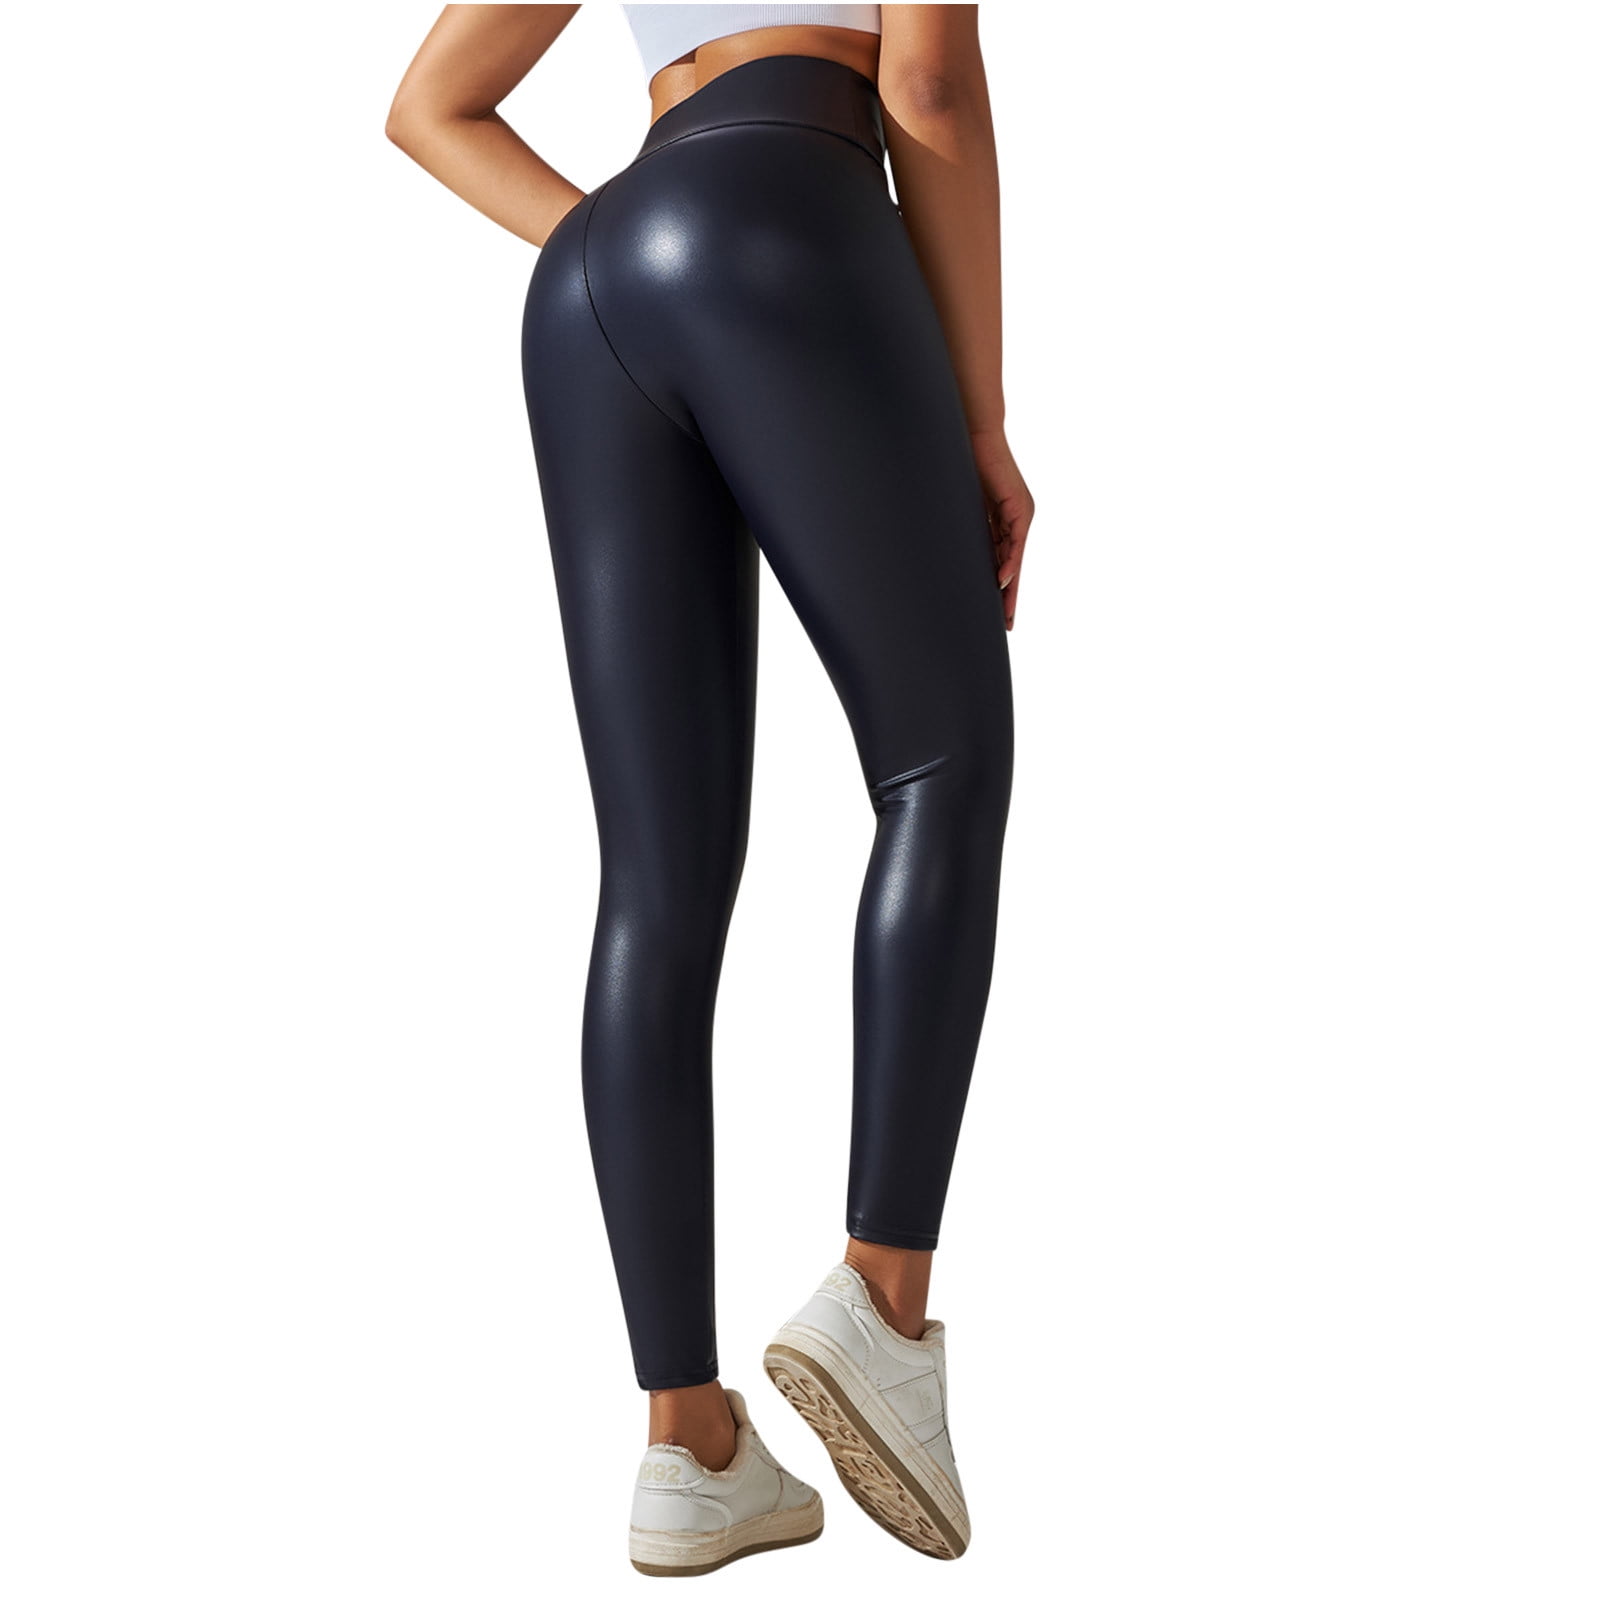 High Waist PU Leather Leggings, Faux Leather Pants for Women